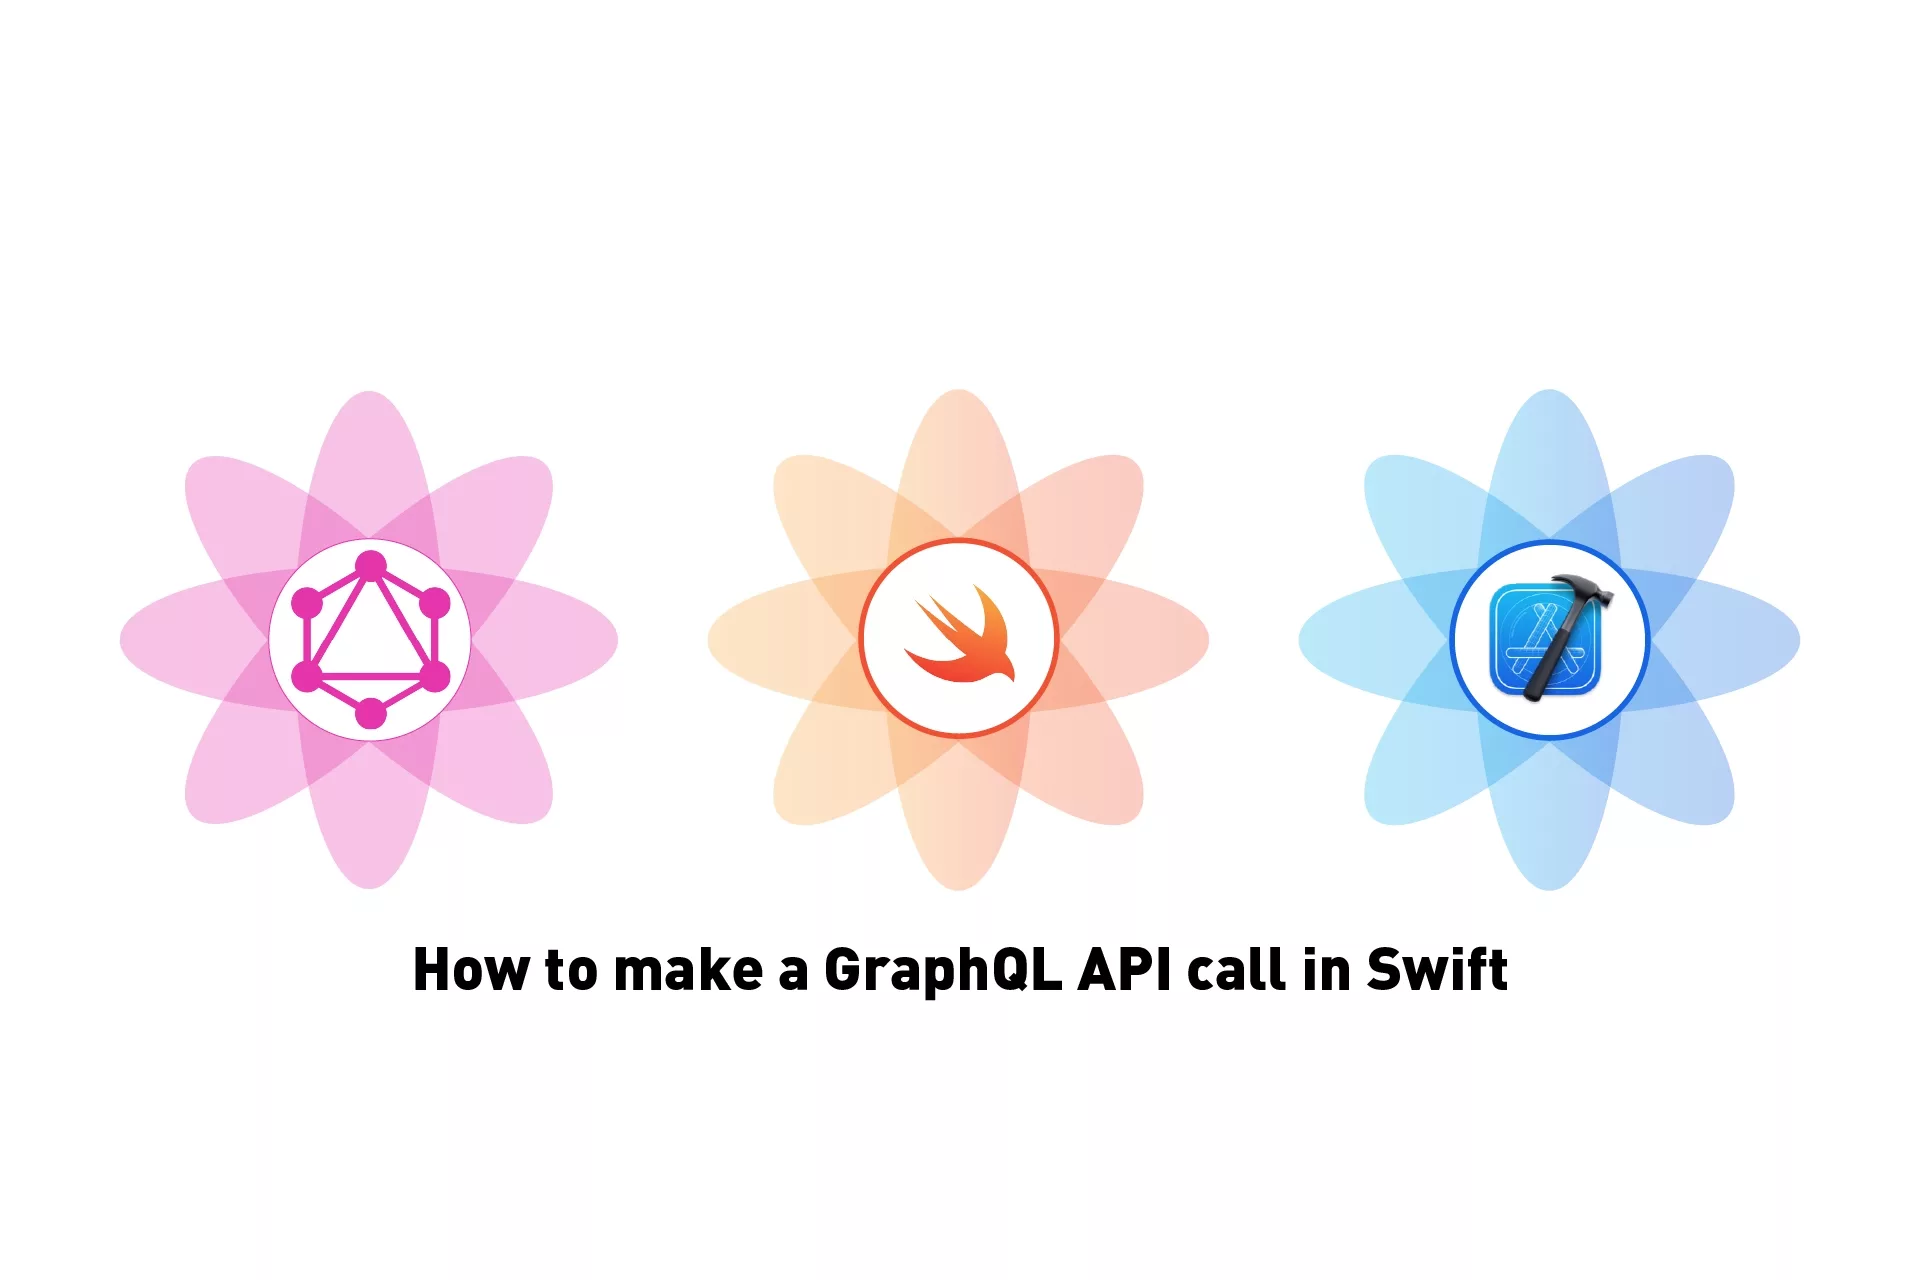 A flower that represents GraphQL next to a flower that represents Swift, next to a flower that represents XCode. Beneath it sits the text that states 'How to make a GraphQL API call in Swift'.